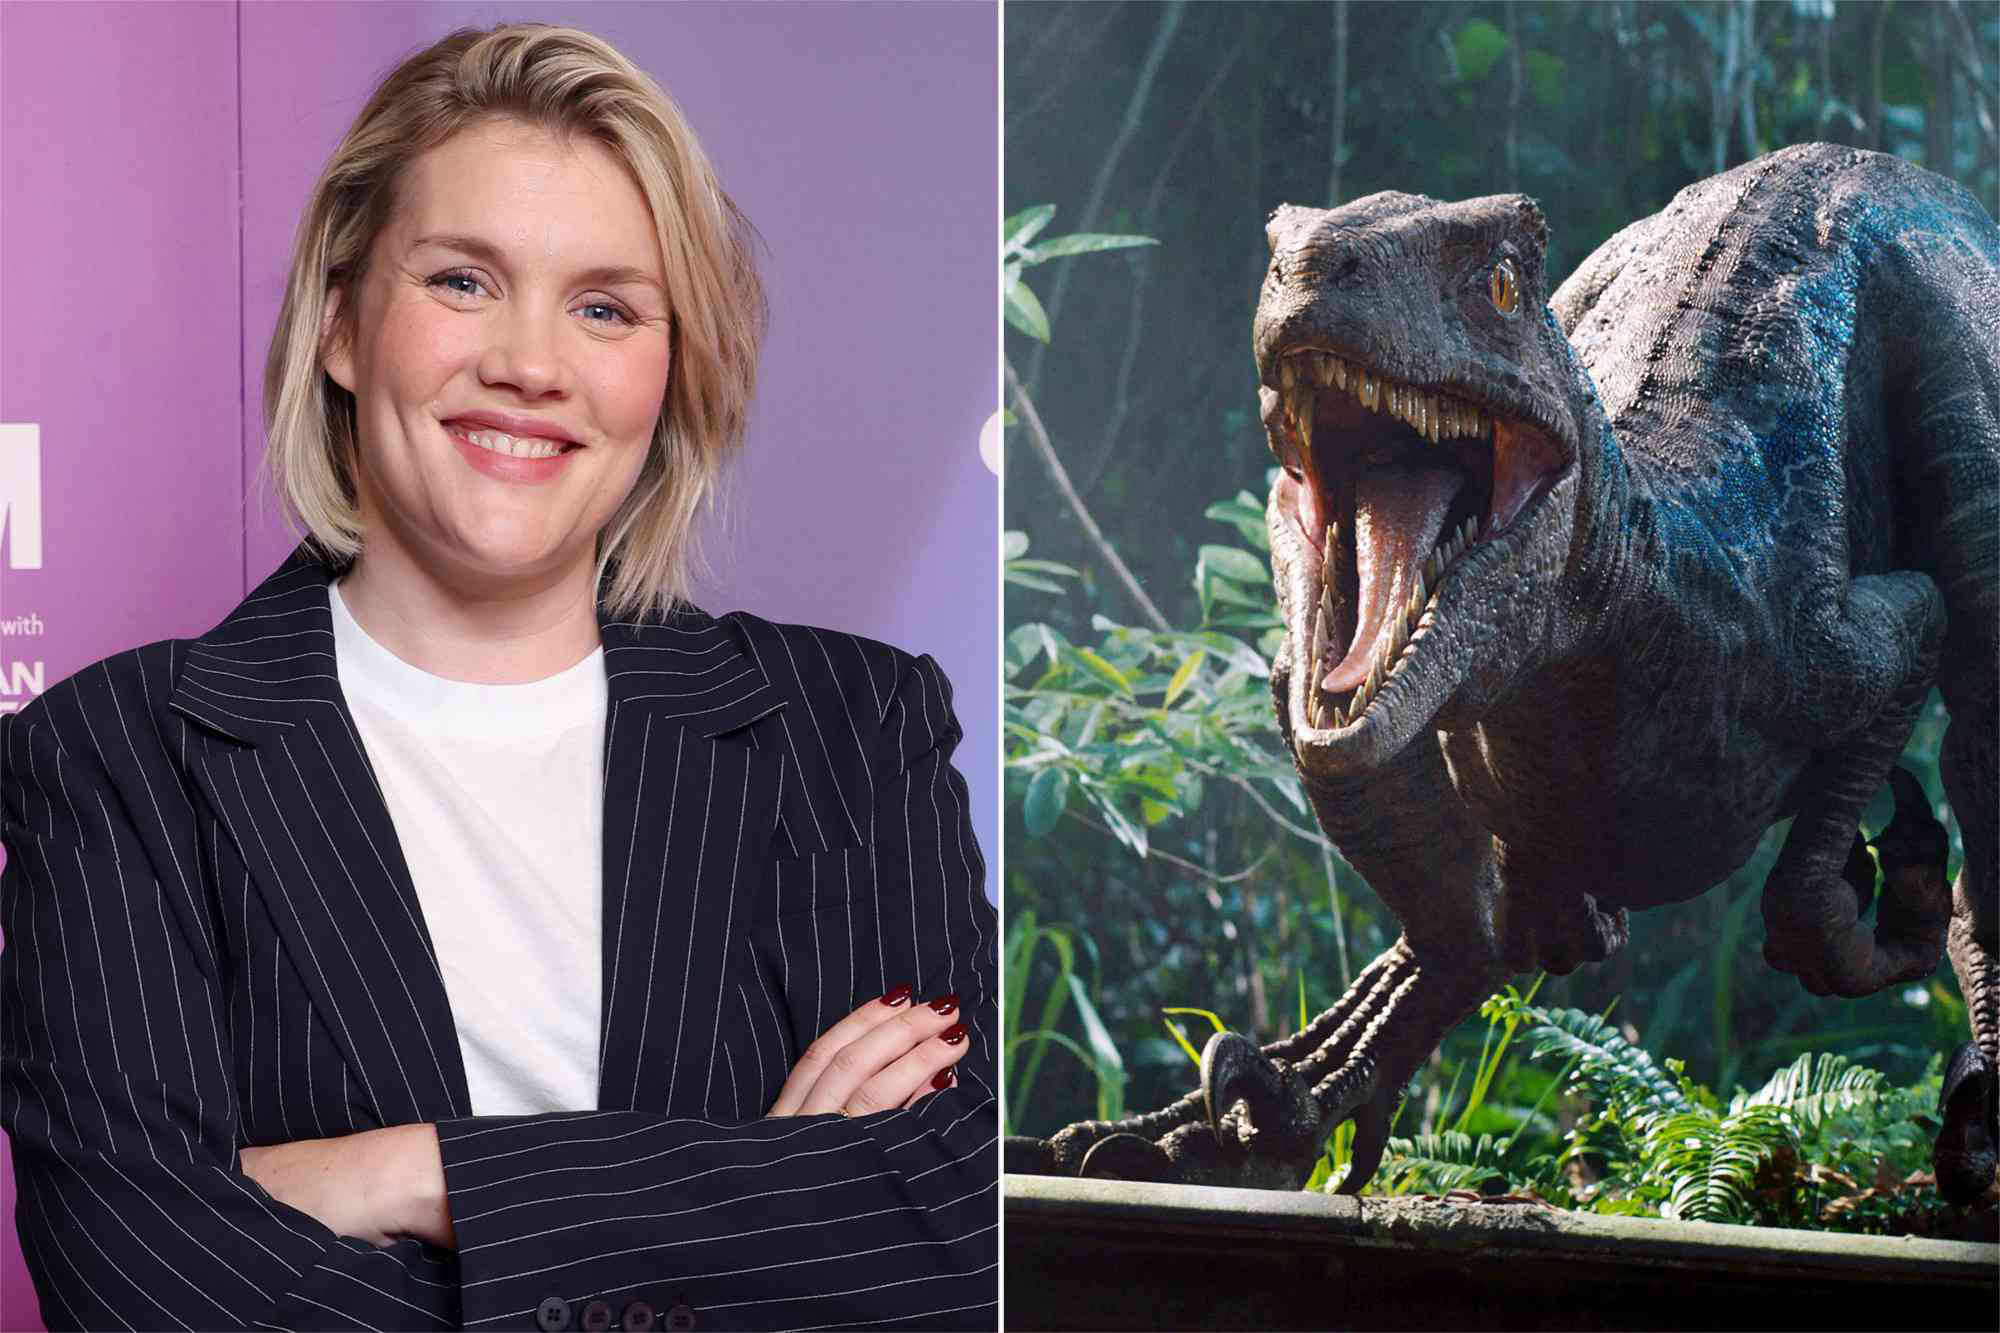 Emerald Fennell has a 'very erotic' “Jurassic Park” idea: 'A marriage ...